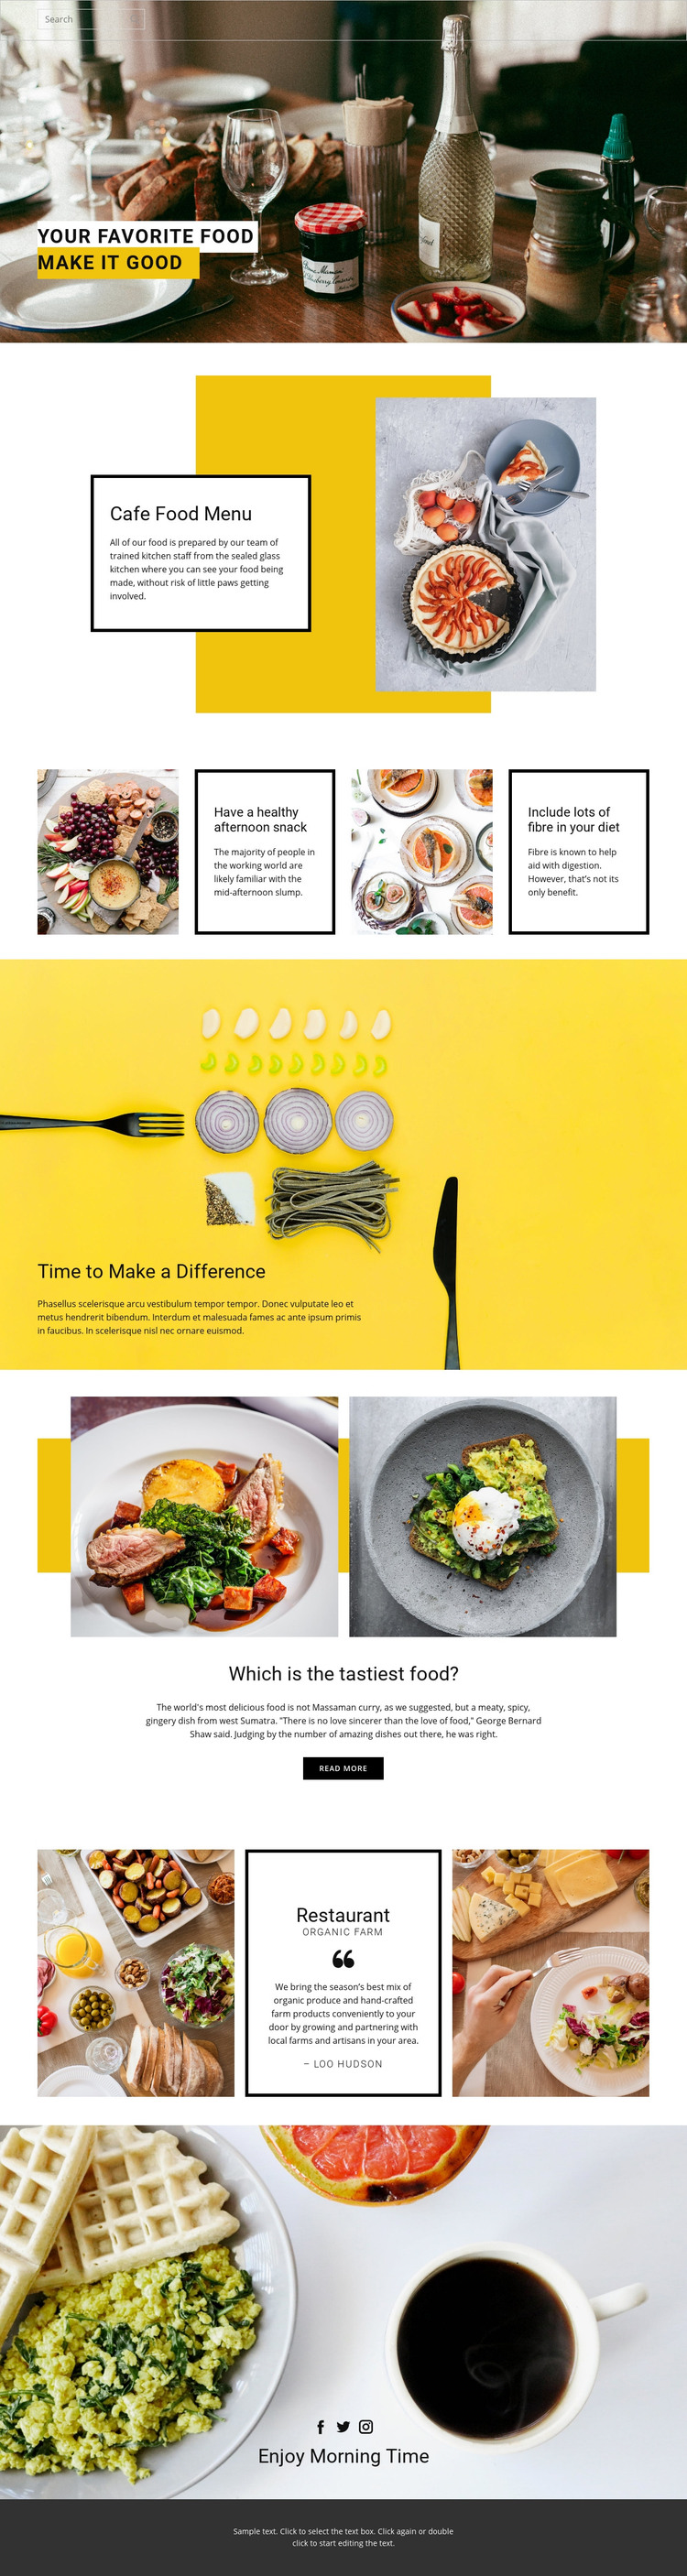 Cook your favorite food Homepage Design